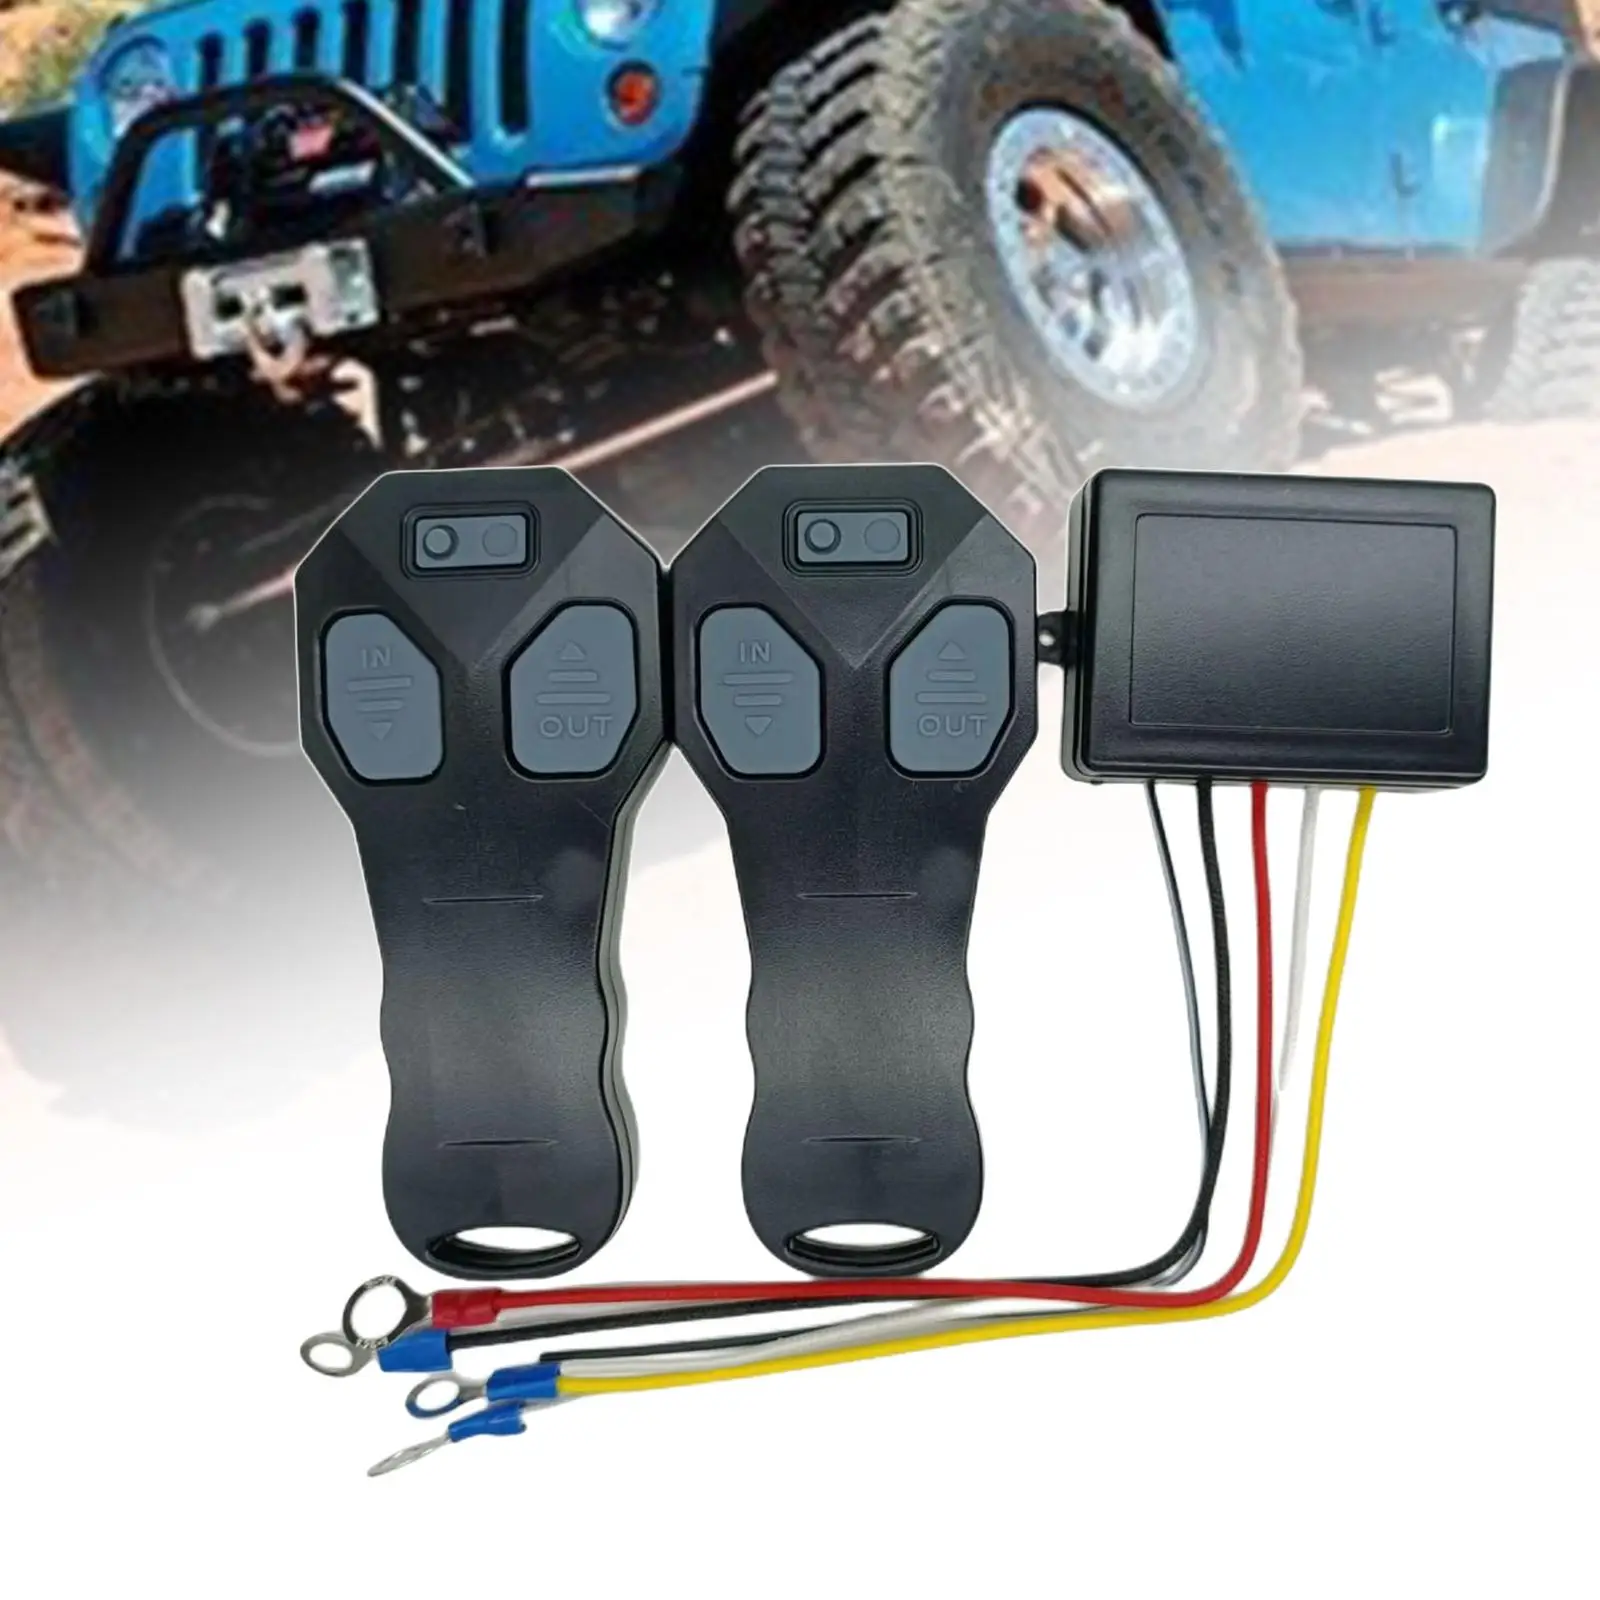 Wireless Winch Remote Control Kit with Indicator Light Waterproof Easy to Install DC12V 24V for Vehicle Car Trailer SUV ATV